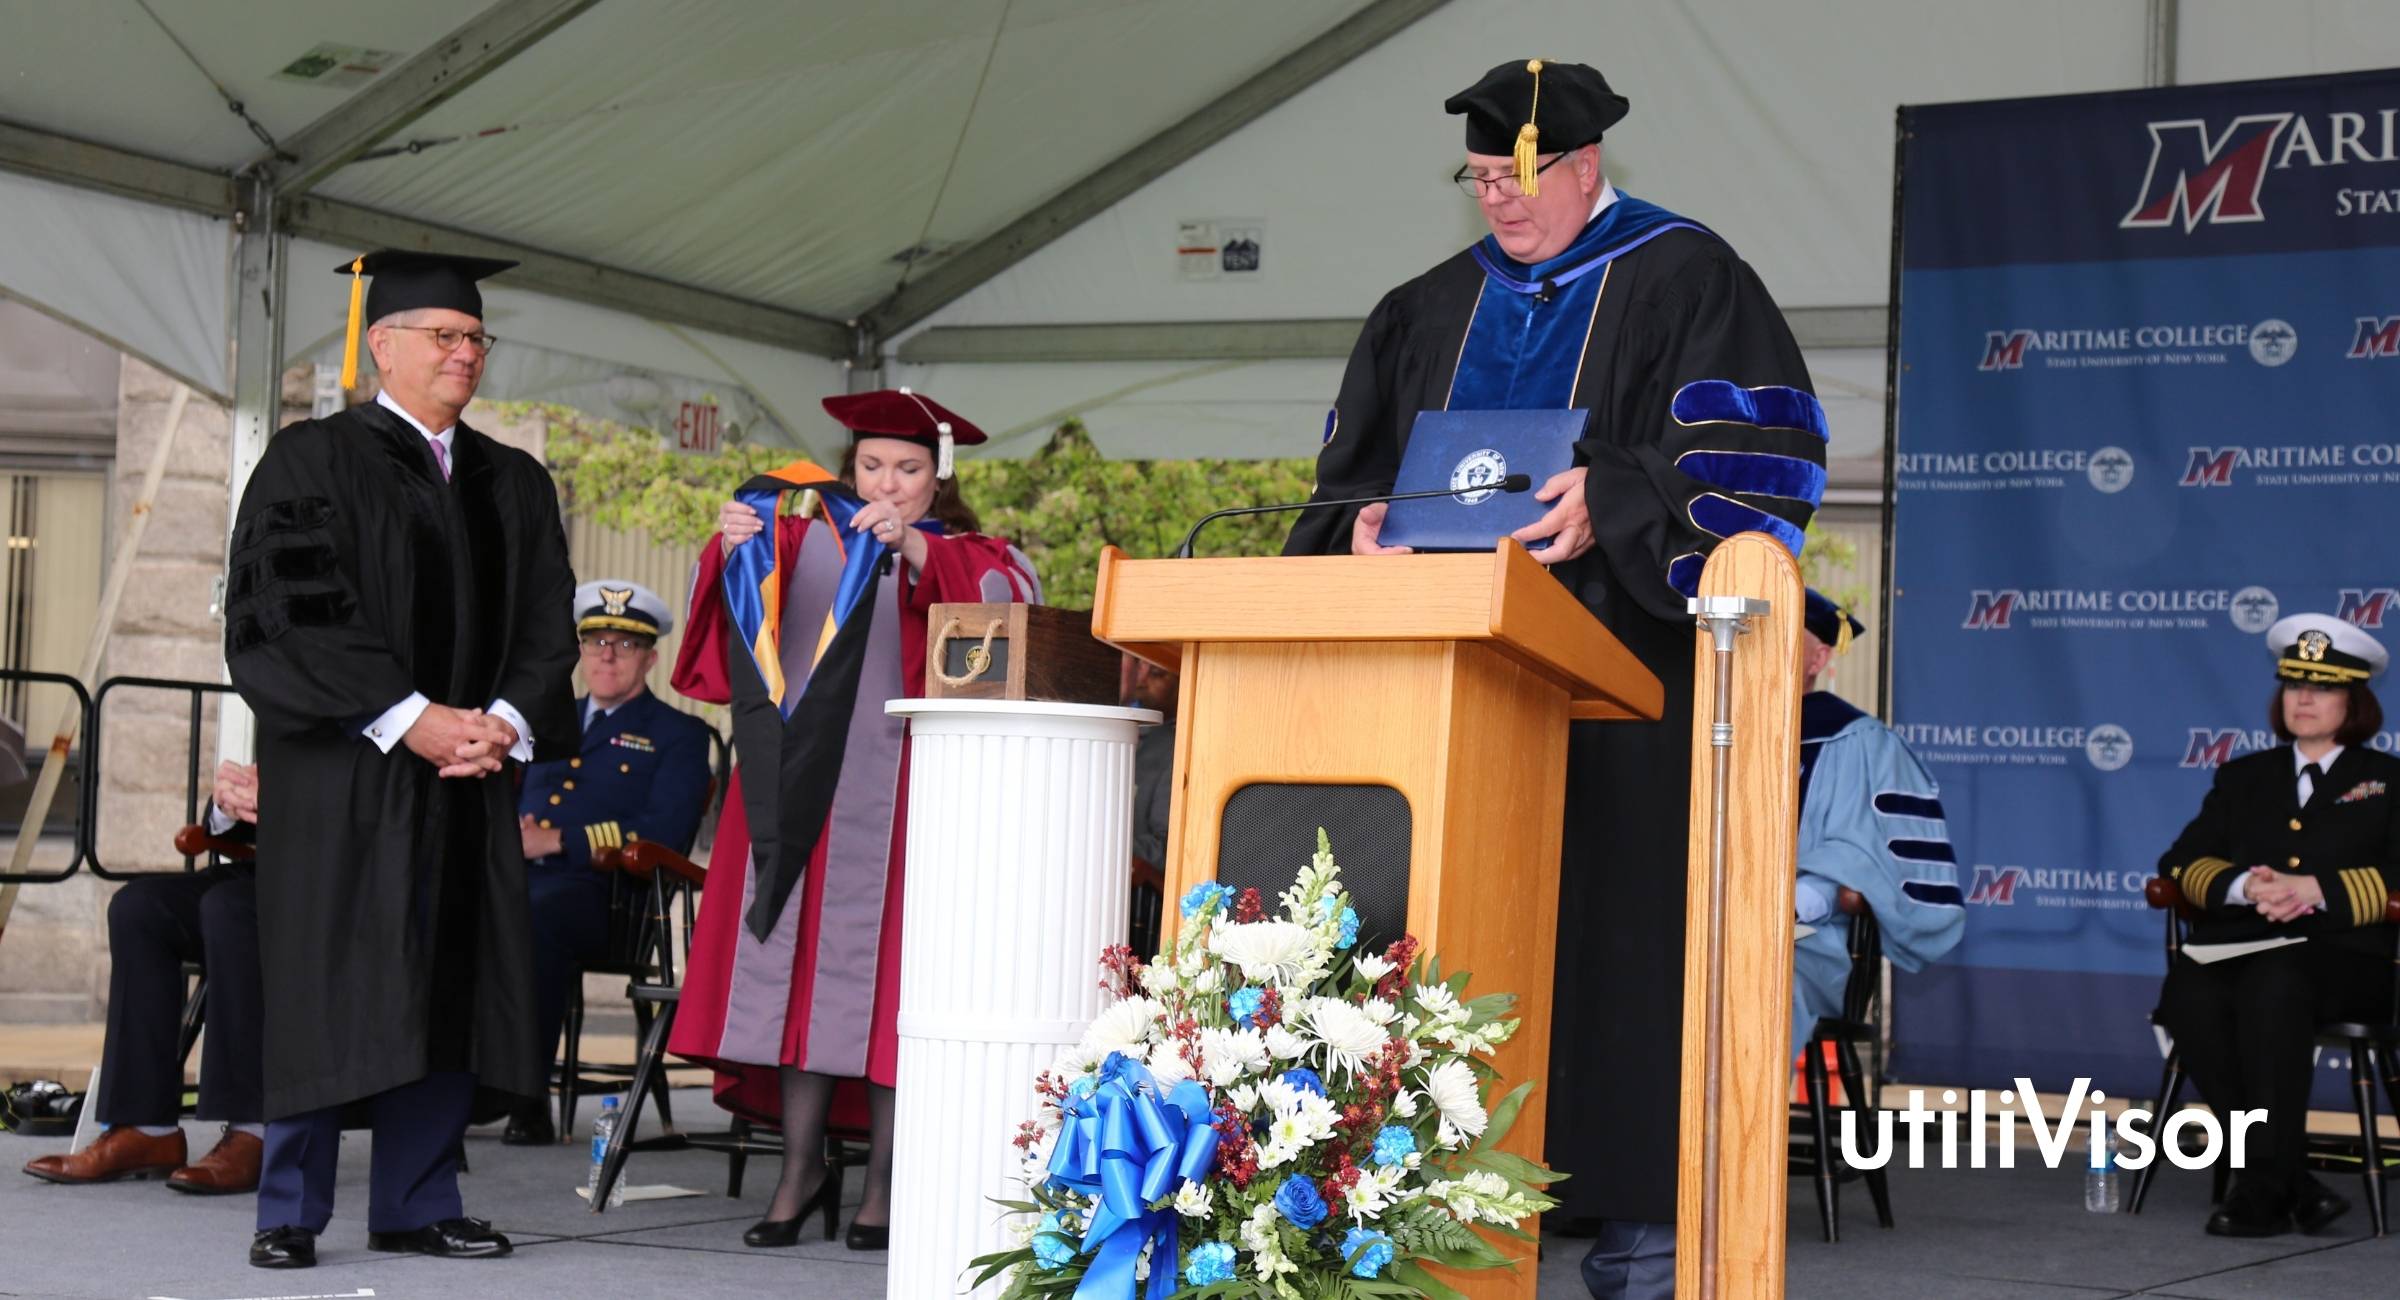 Richard Angerame awarded honorary doctorate at Maritime College on May 6, 2022